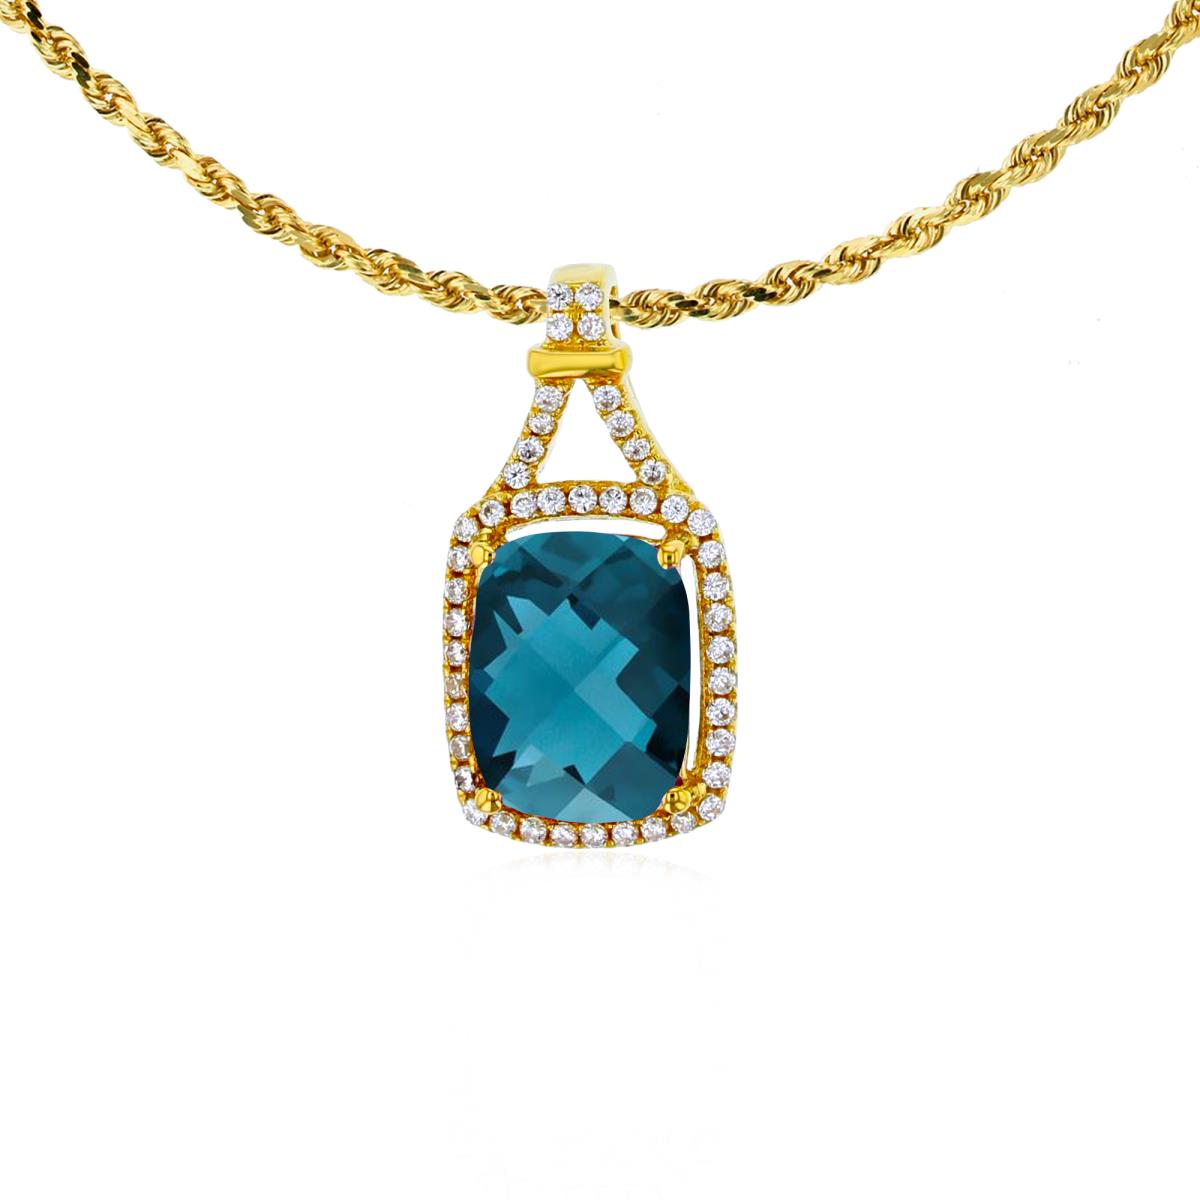 10K Yellow Gold 8x6mm Cushion London Blue Topaz & 0.13 CTTW Rd Diamonds Halo 18" Rope Chain Necklace